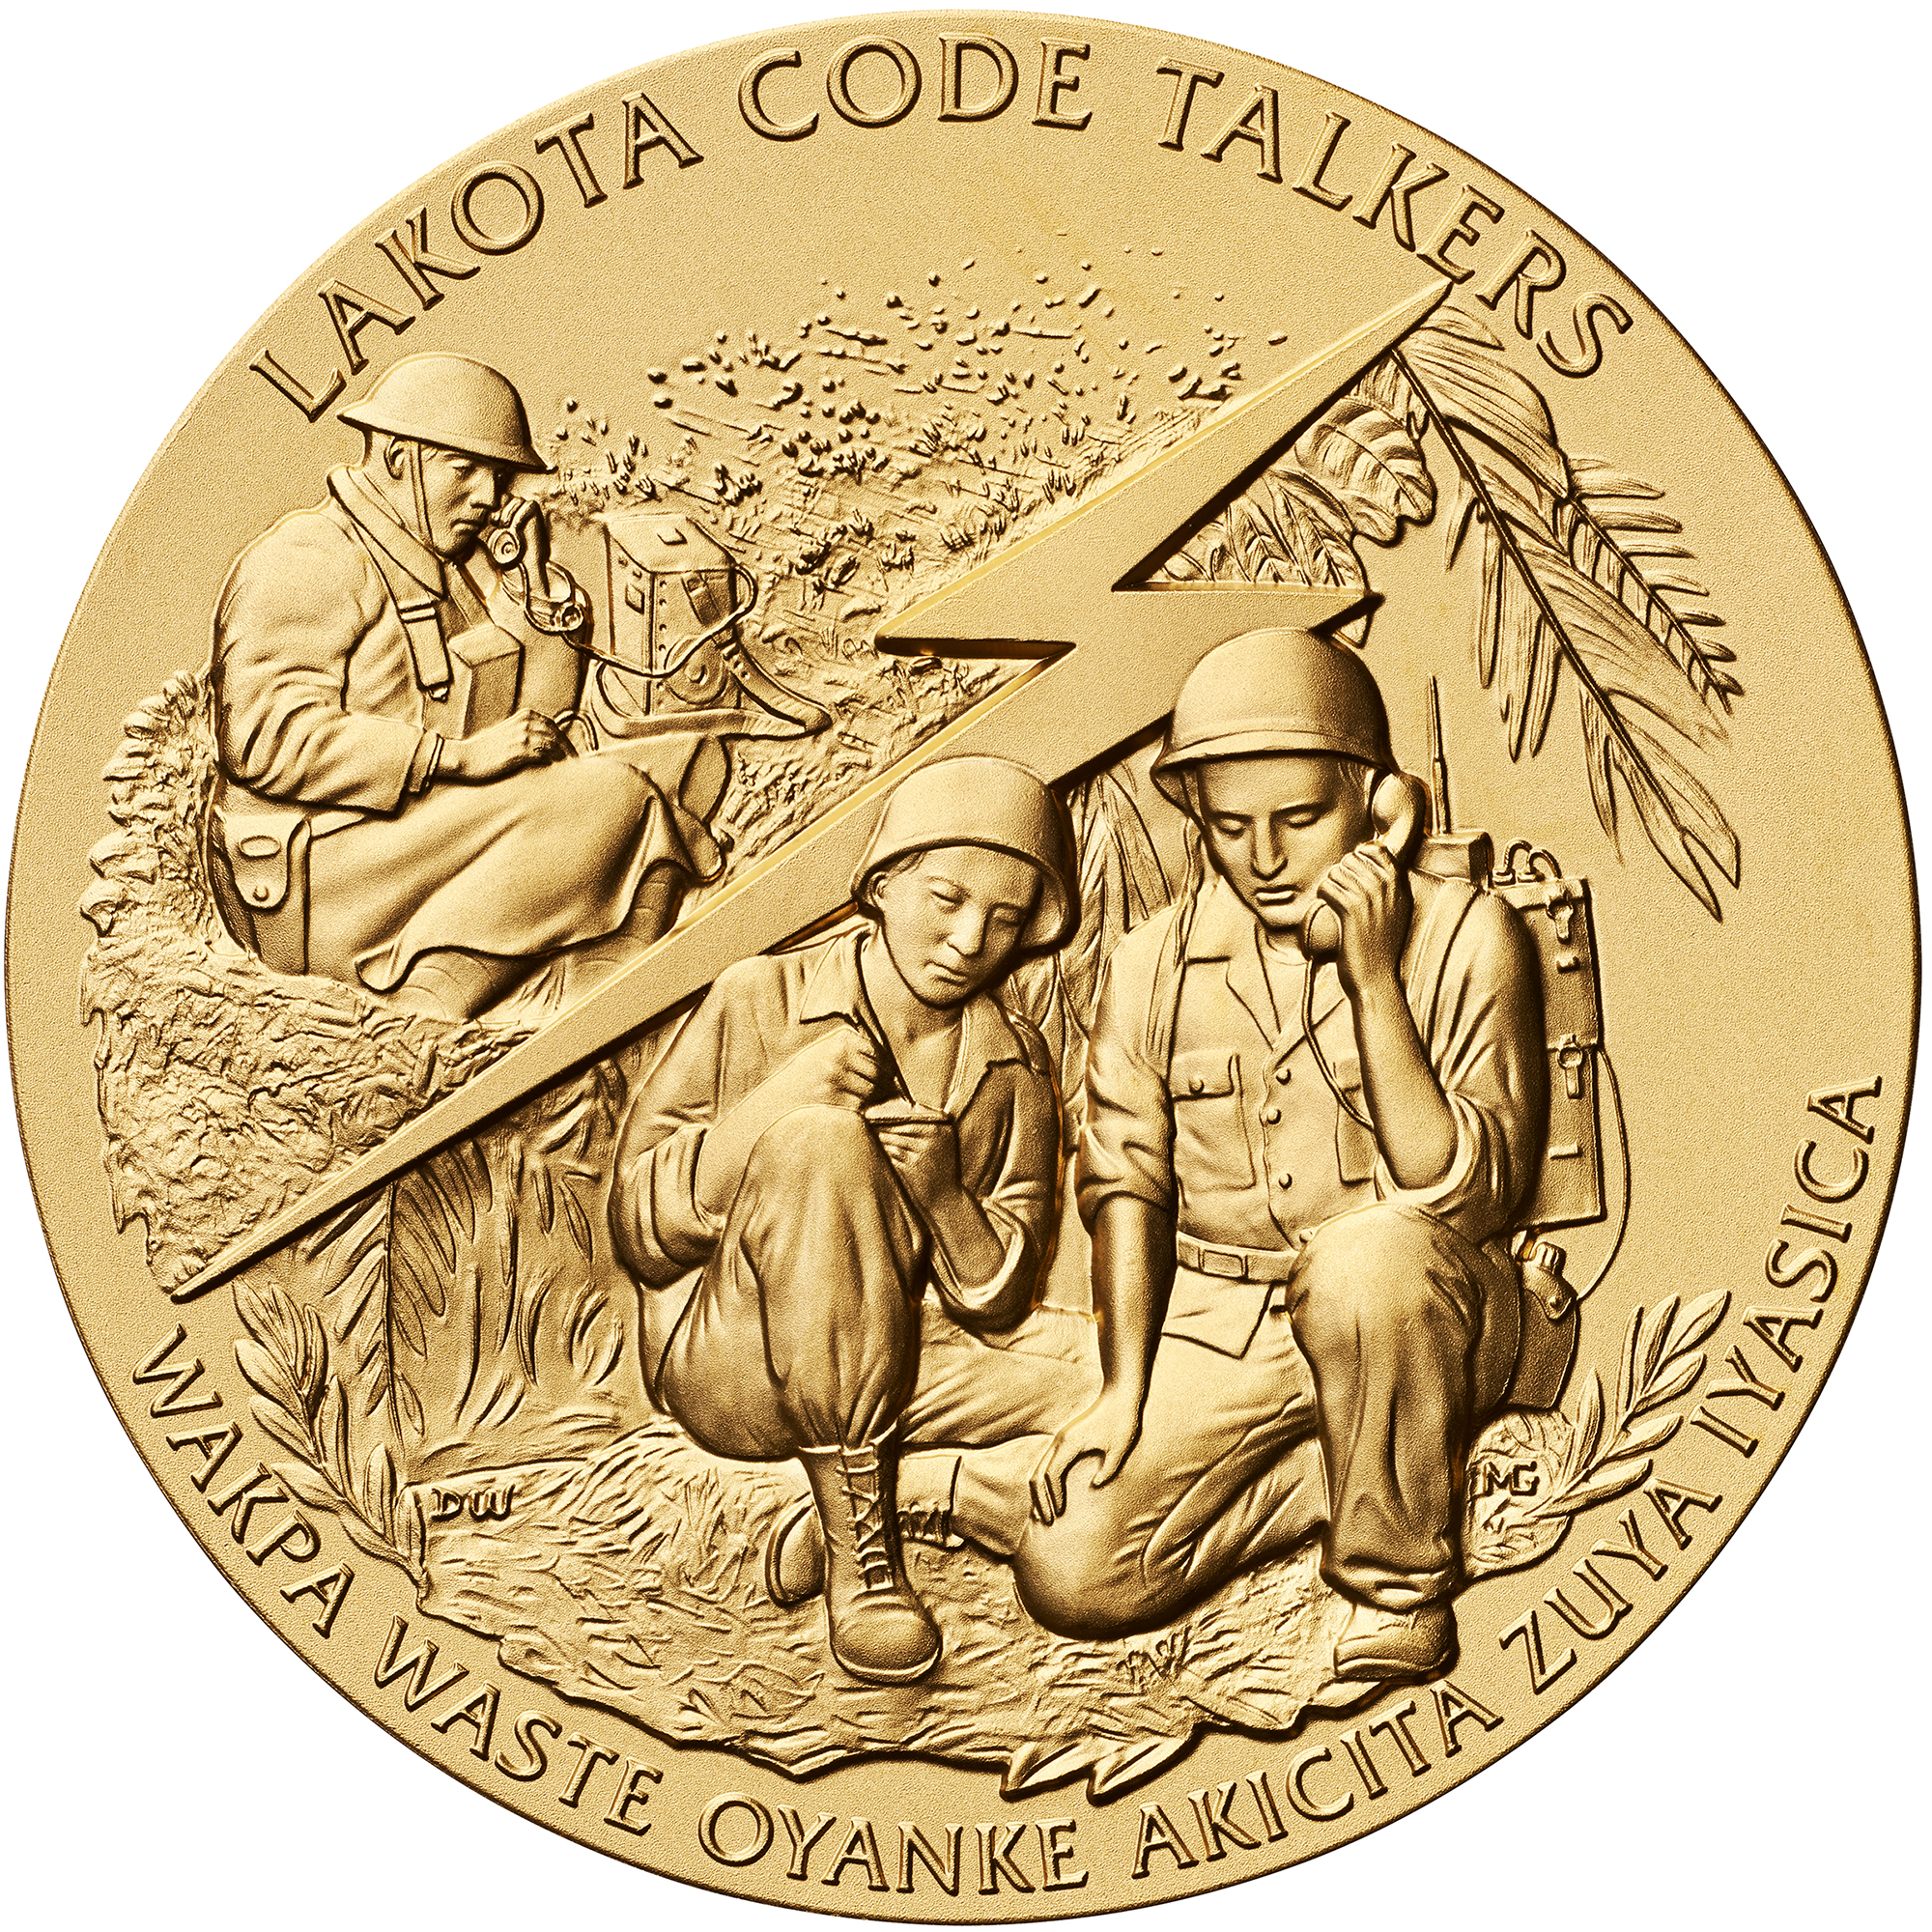 OSAGE NATION CODE TALKERS BRONZE MEDAL FROM US MINT